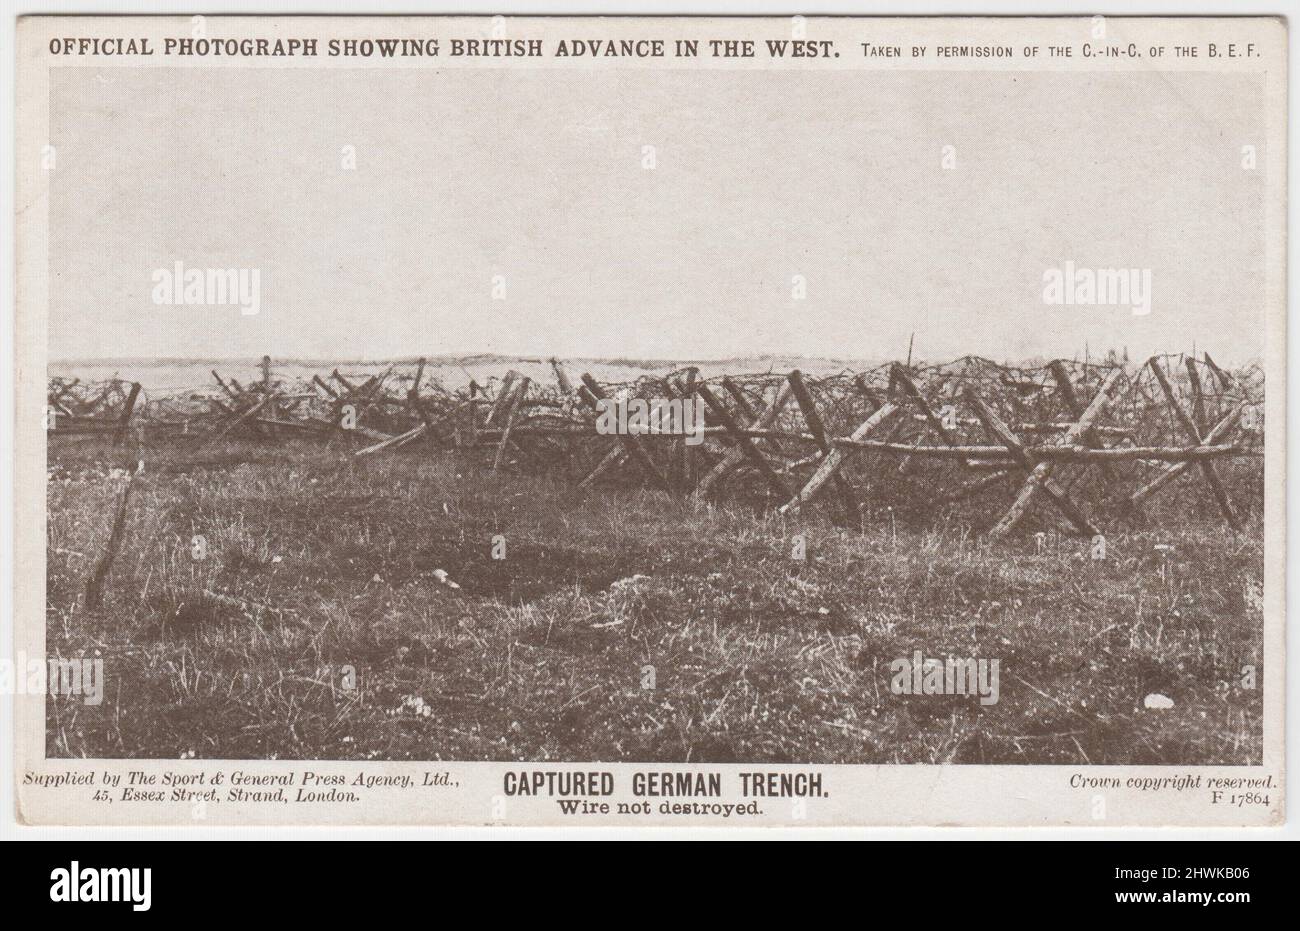 'Captured German trench. Wire not destroyed': 'Official photograph showing British advance in the West' taken by permission of the Commander in Chief of the British Expeditionary Force (BEF), supplied by The Sport & General Press Agency Ltd., 45 Essex Street, Strand, London. View of barbed wire barricades on the Western Front Stock Photo